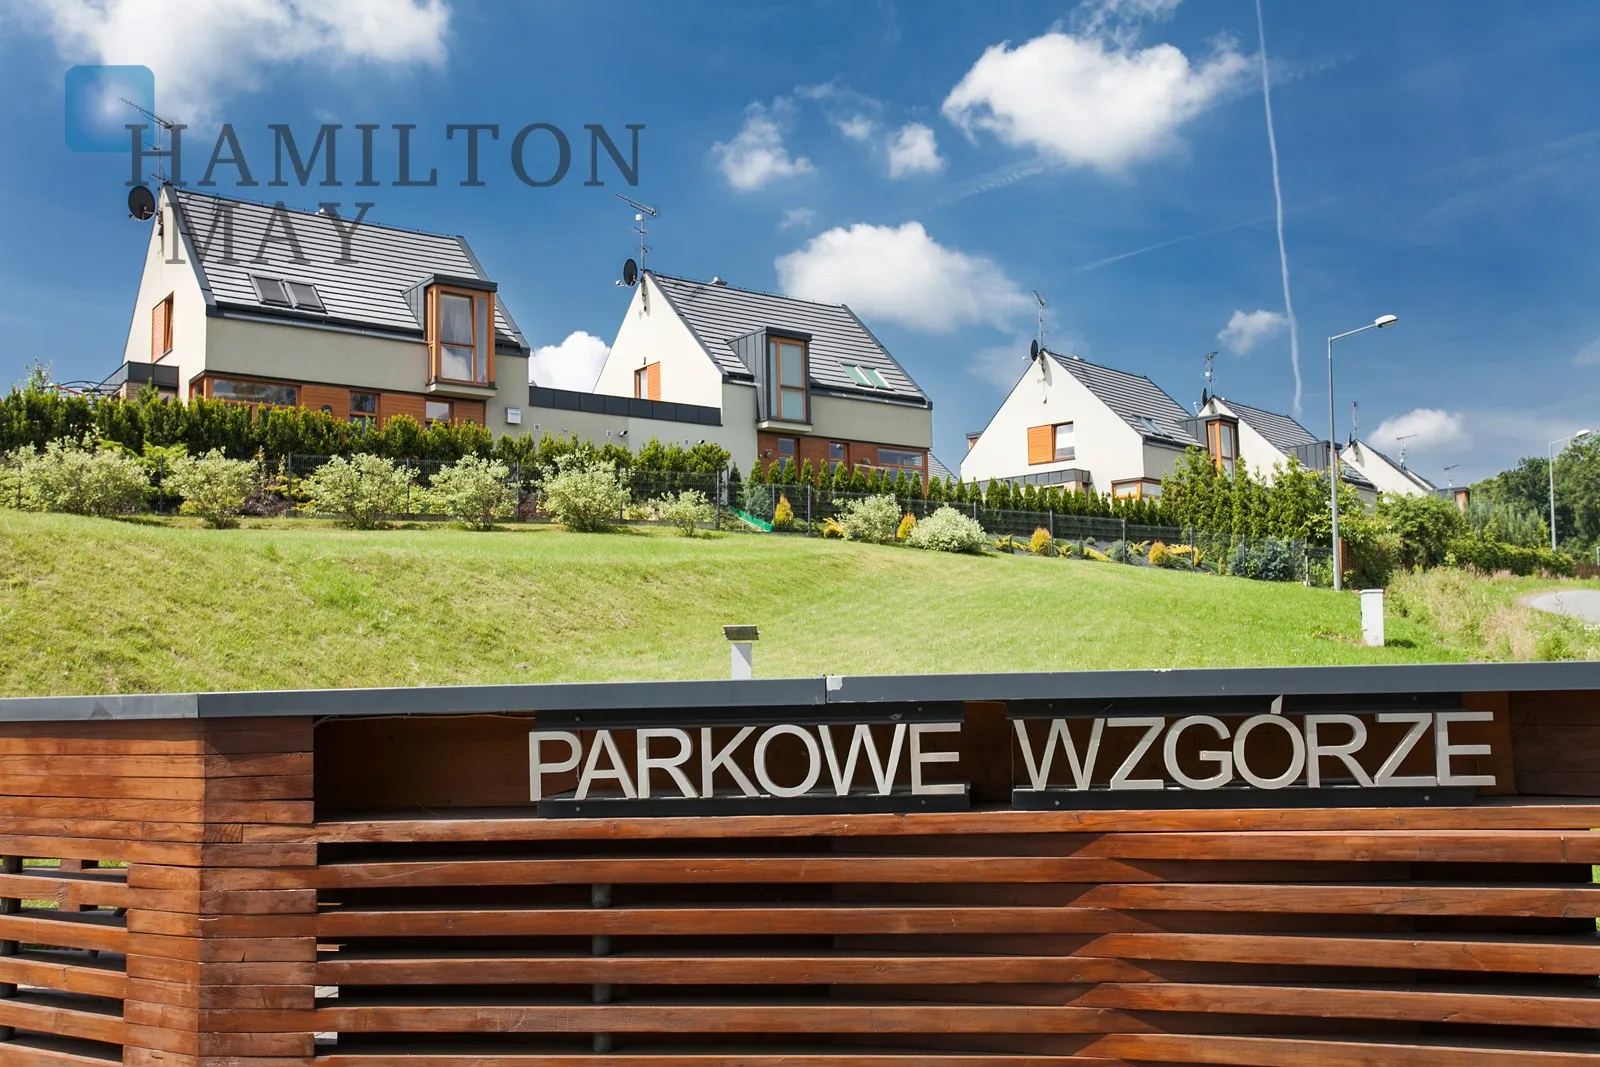 For rent a luxury house located in the gated residential neighbourhood "Parkowe Wzgórze" - Mogilany (South Kraków).